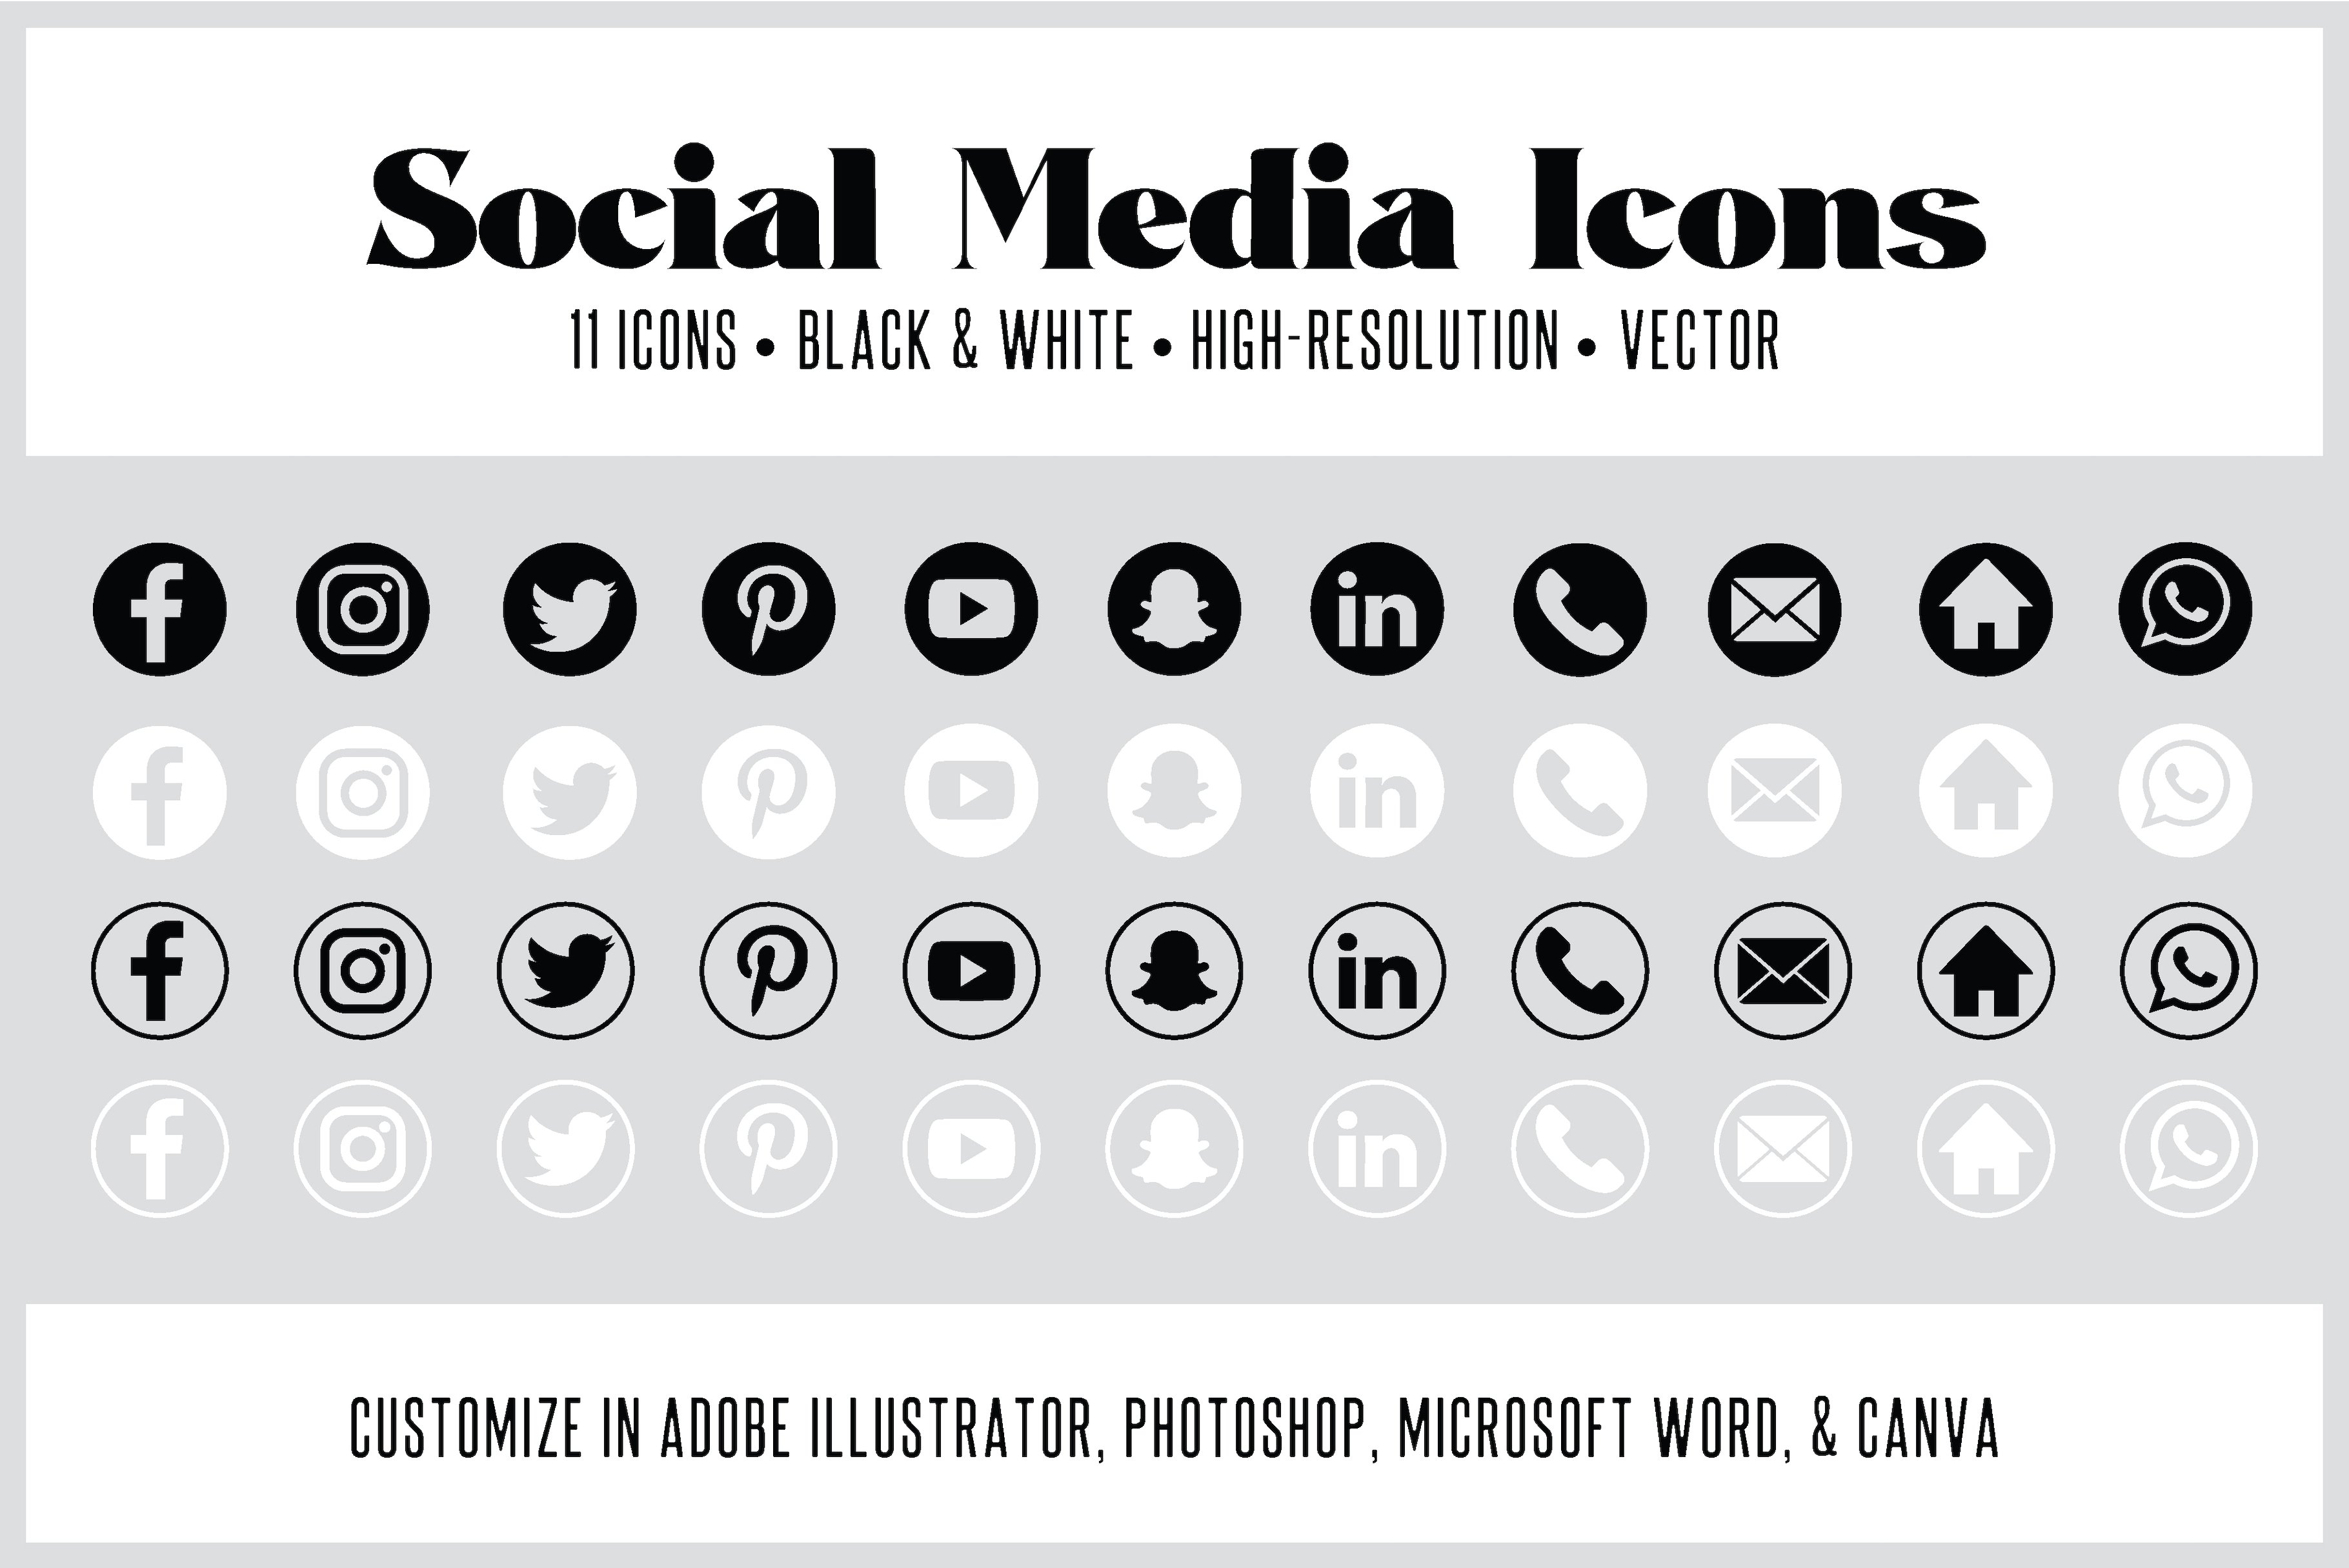 11 Customizable Social Media Icons cover image.